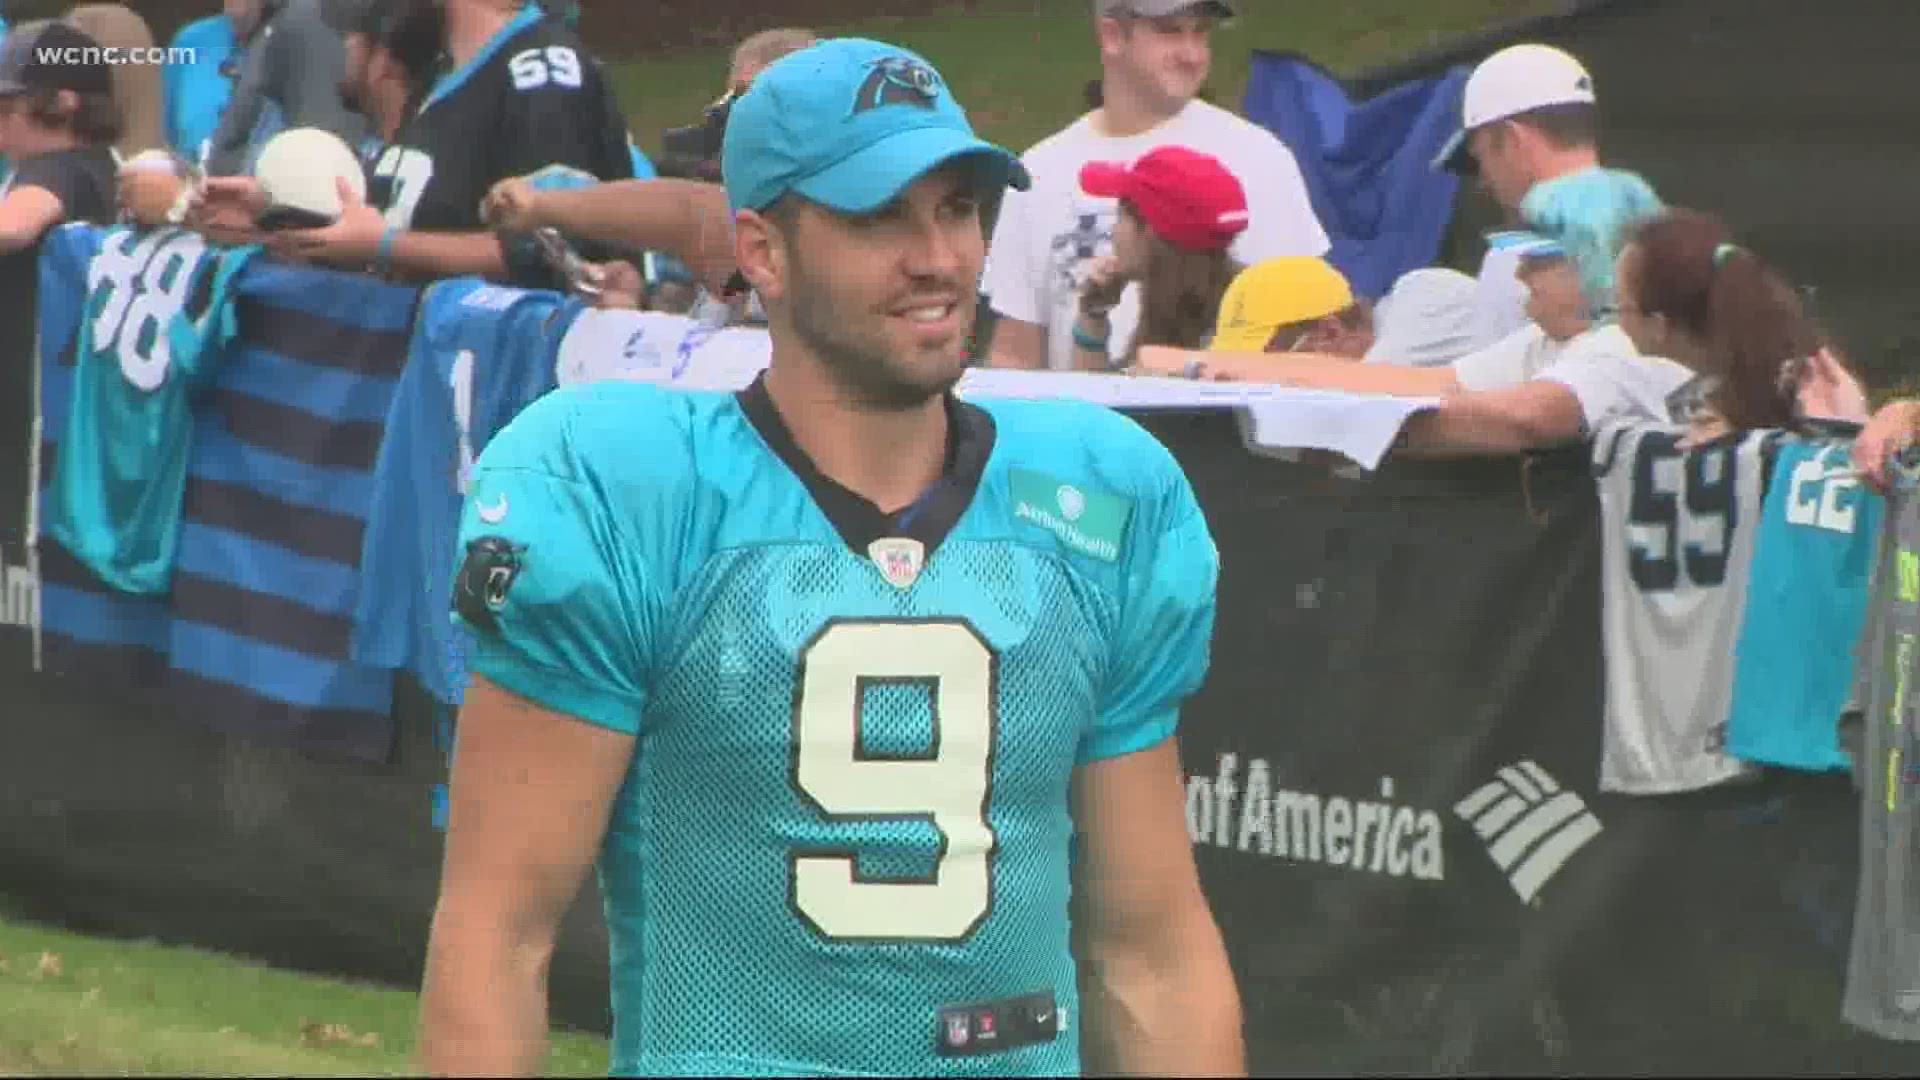 Gano took over as the team’s kicker in 2012 and spent seven seasons handling field goals and kickoffs for the Panthers.